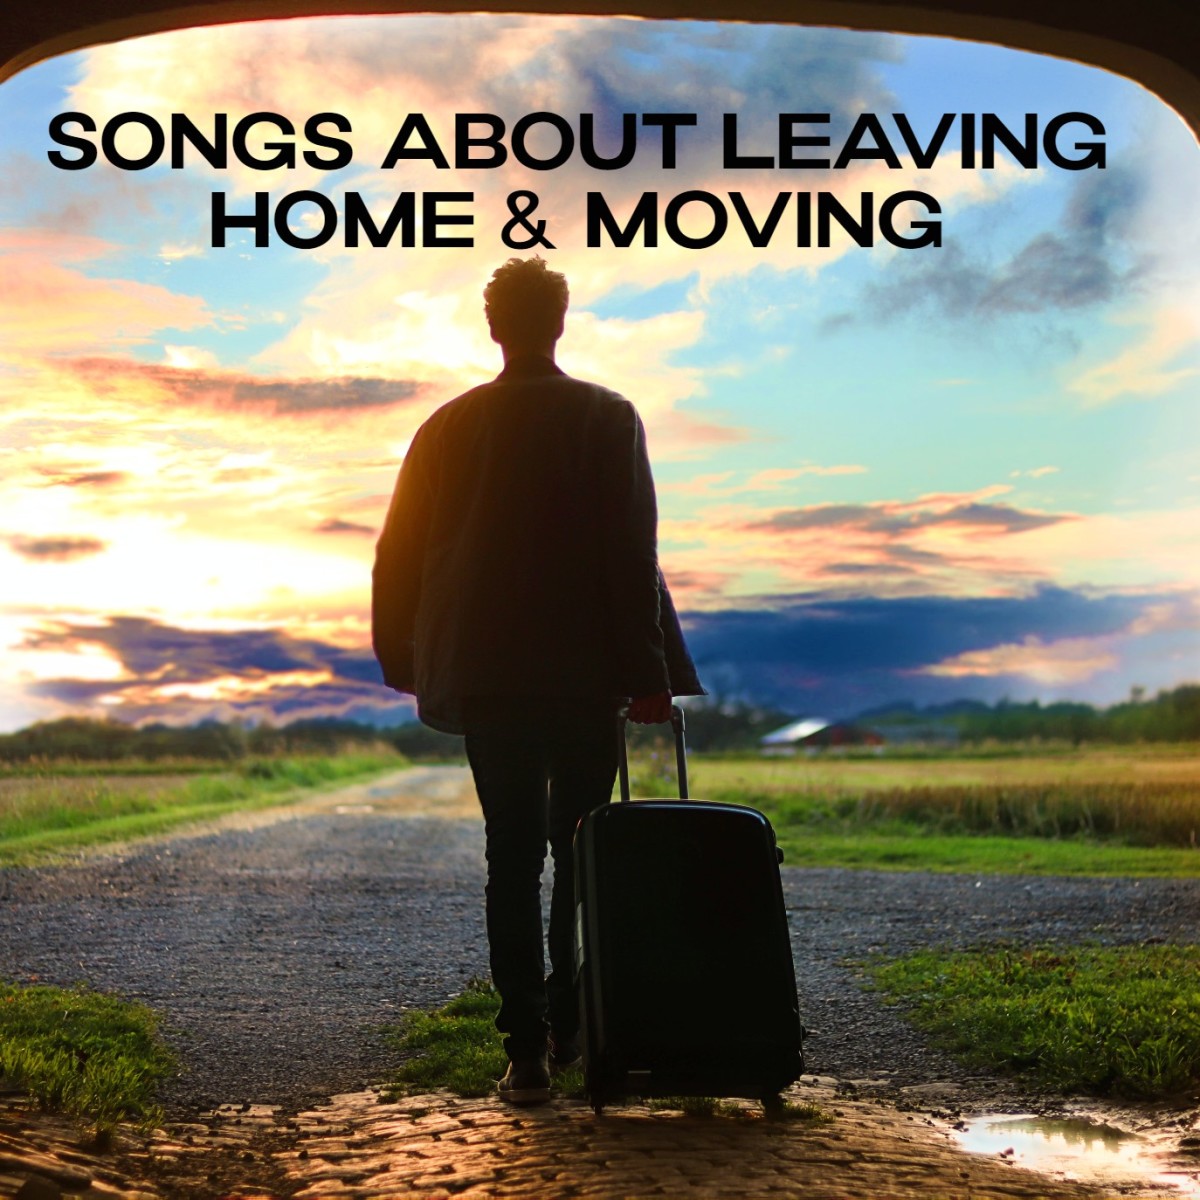 69 Songs About Leaving Home and Moving